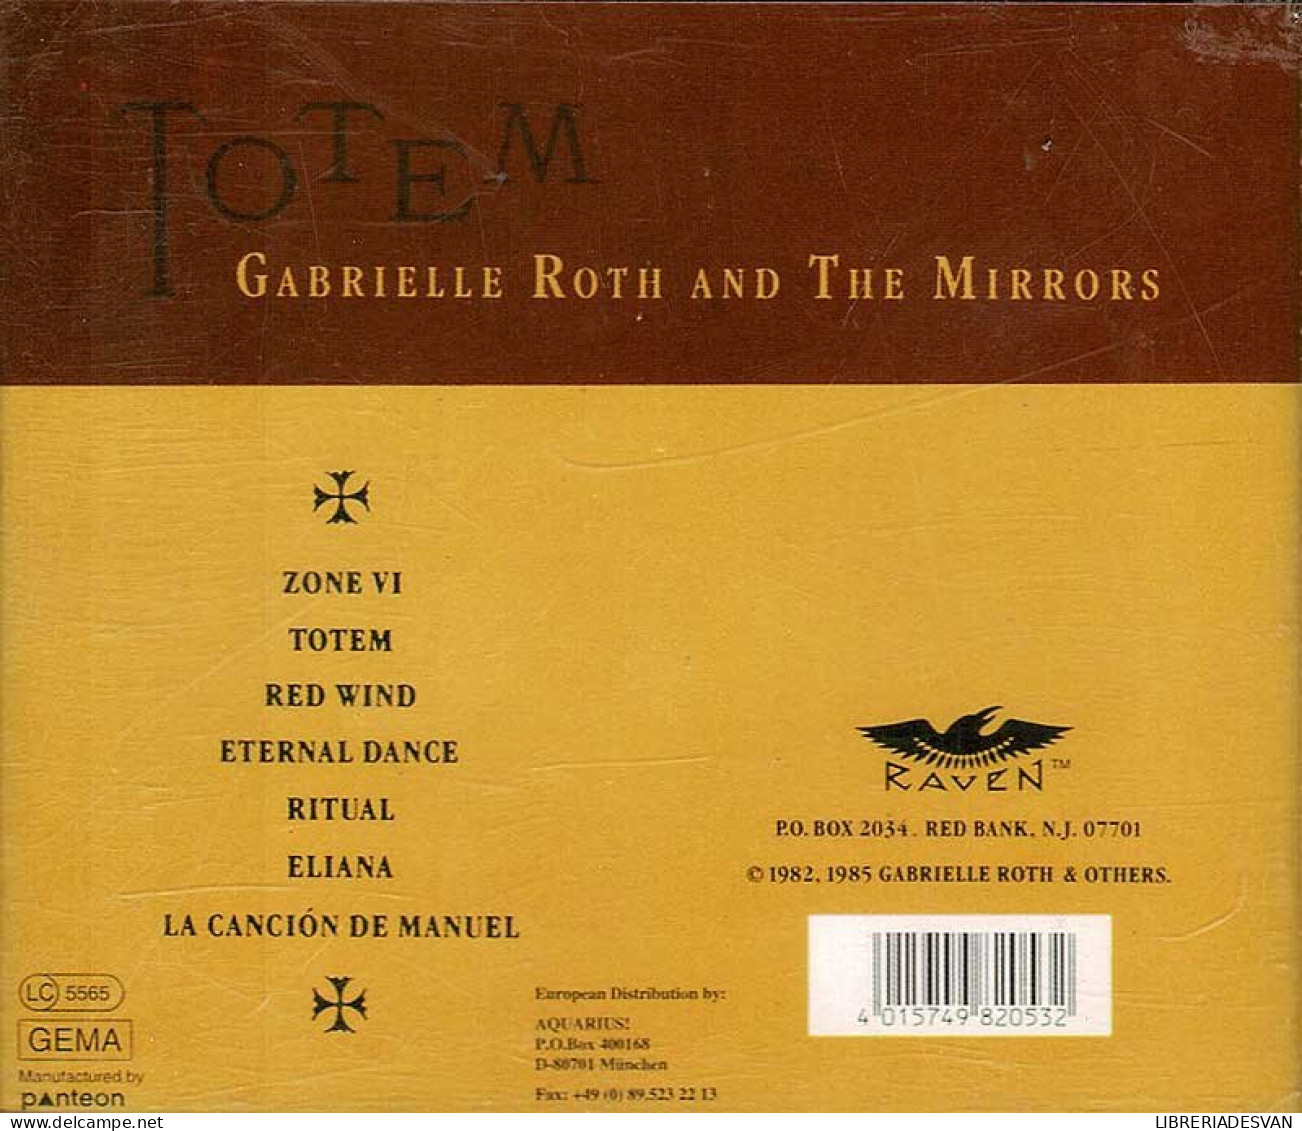 Gabrielle Roth And The Mirrors - Totem. CD - New Age